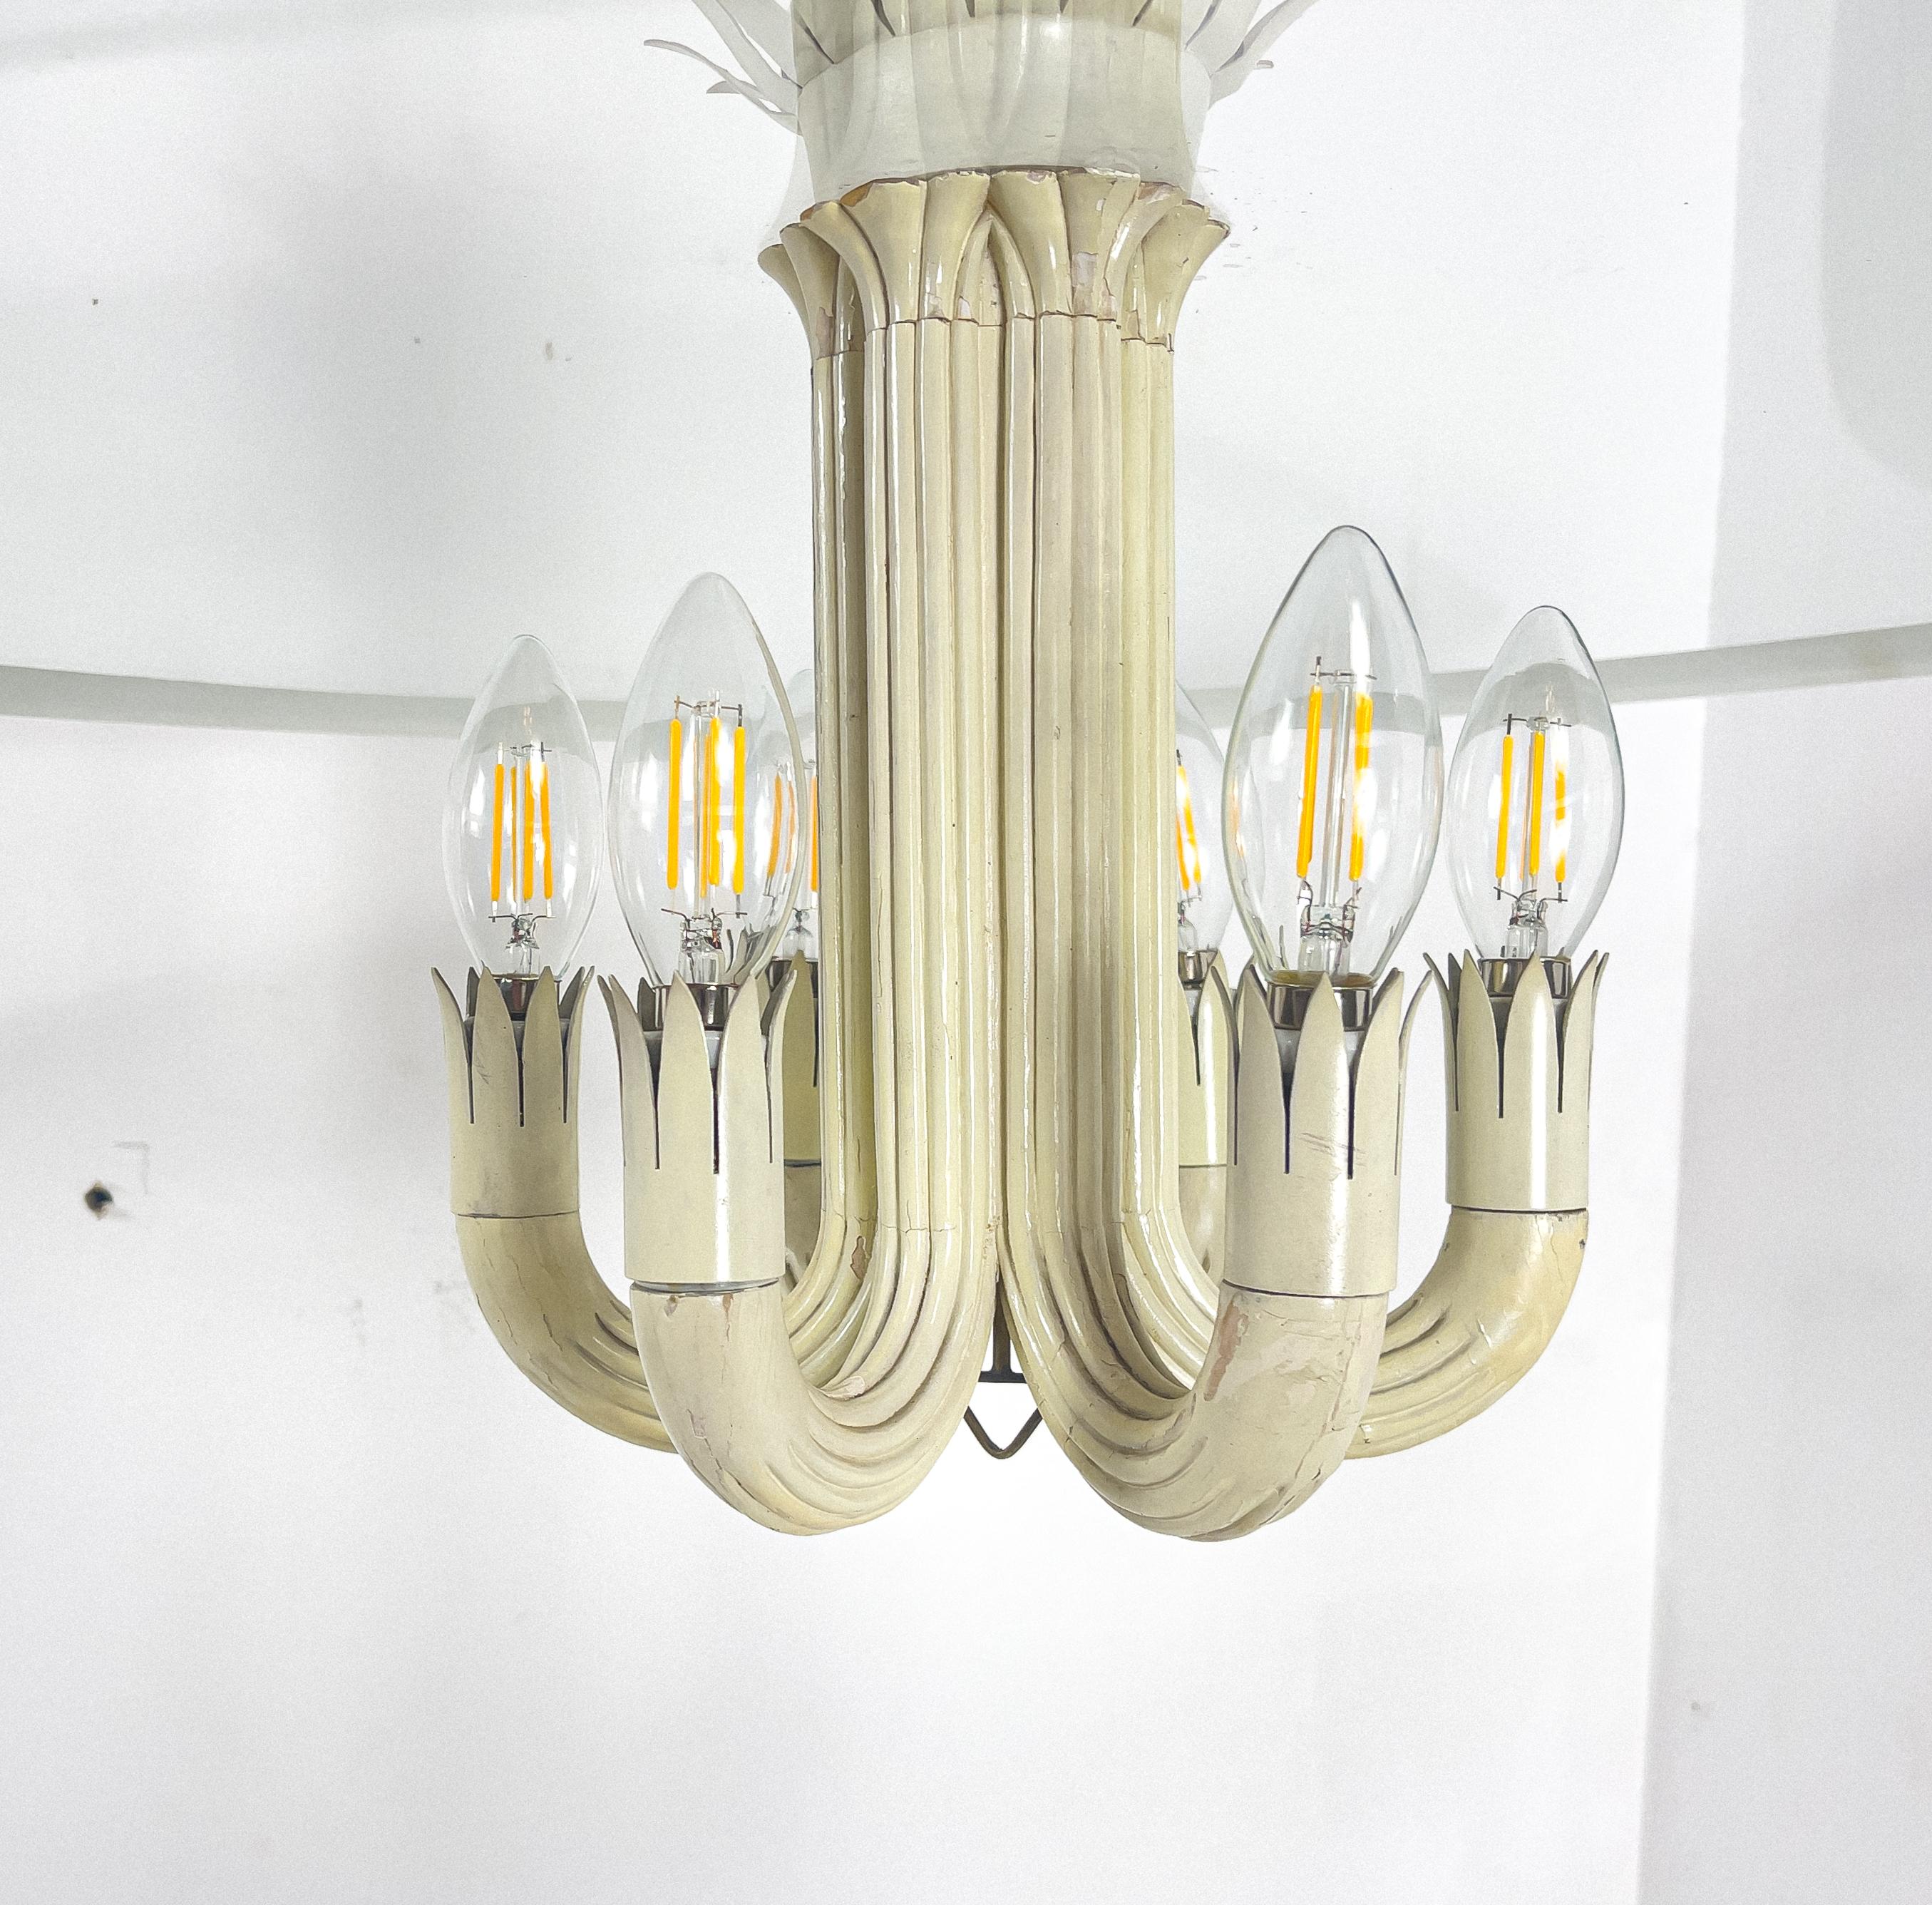 Italian Neoclassical Glass Wood Chandelier by Pietro Chiesa for Fontana Arte Italy 1930s For Sale